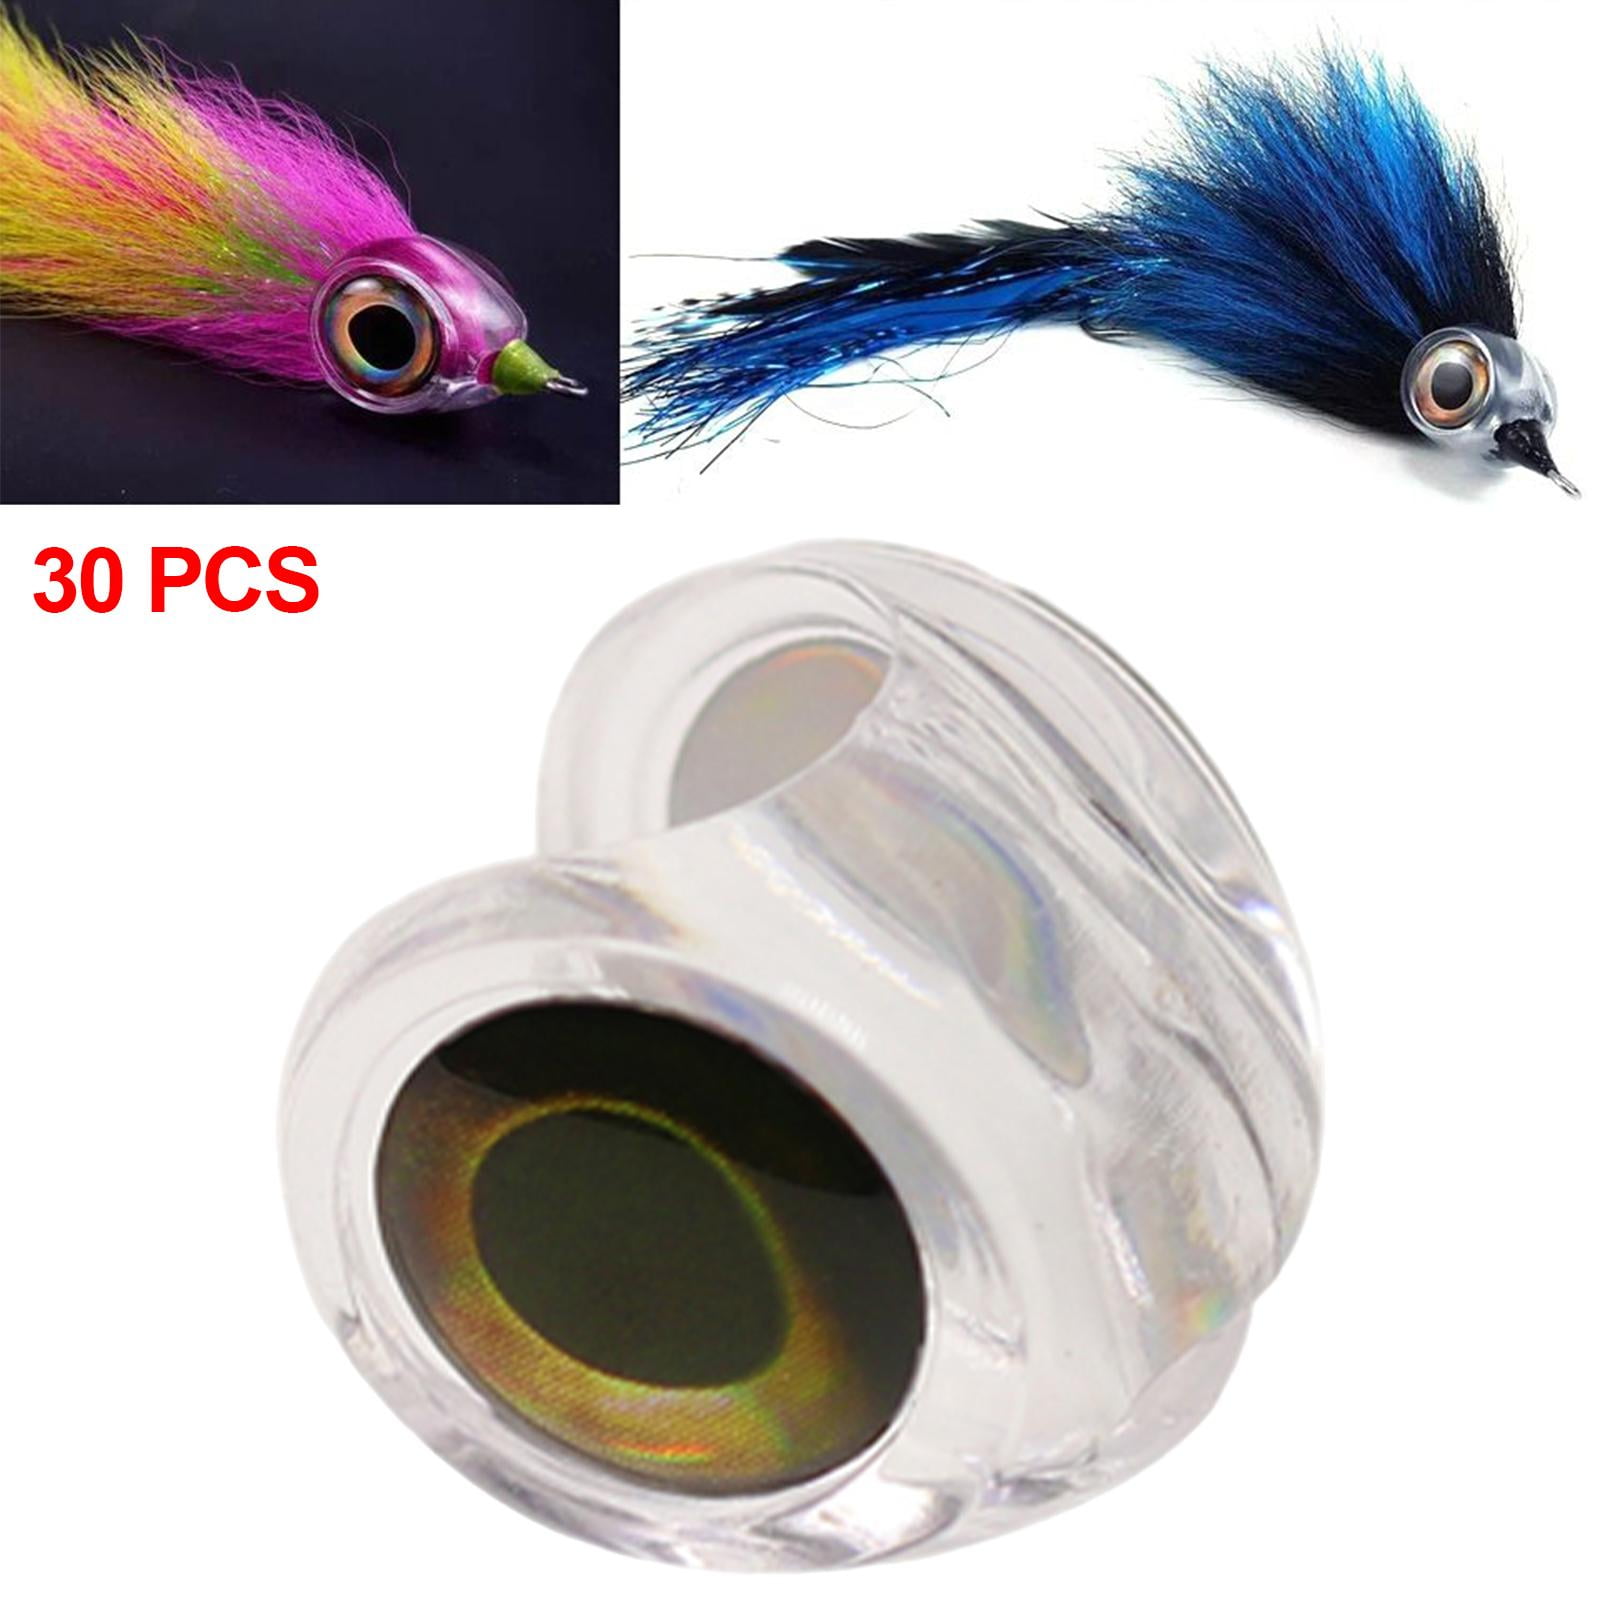 Fly Tying Fishes ,30PCS Fly Tying Fish for Make Streamer,30PCS Pike Bass TroutFlies  Tying Material,Head Streamer Flies With Eyes Fly Fishing ,30PCS Durable  Fish 